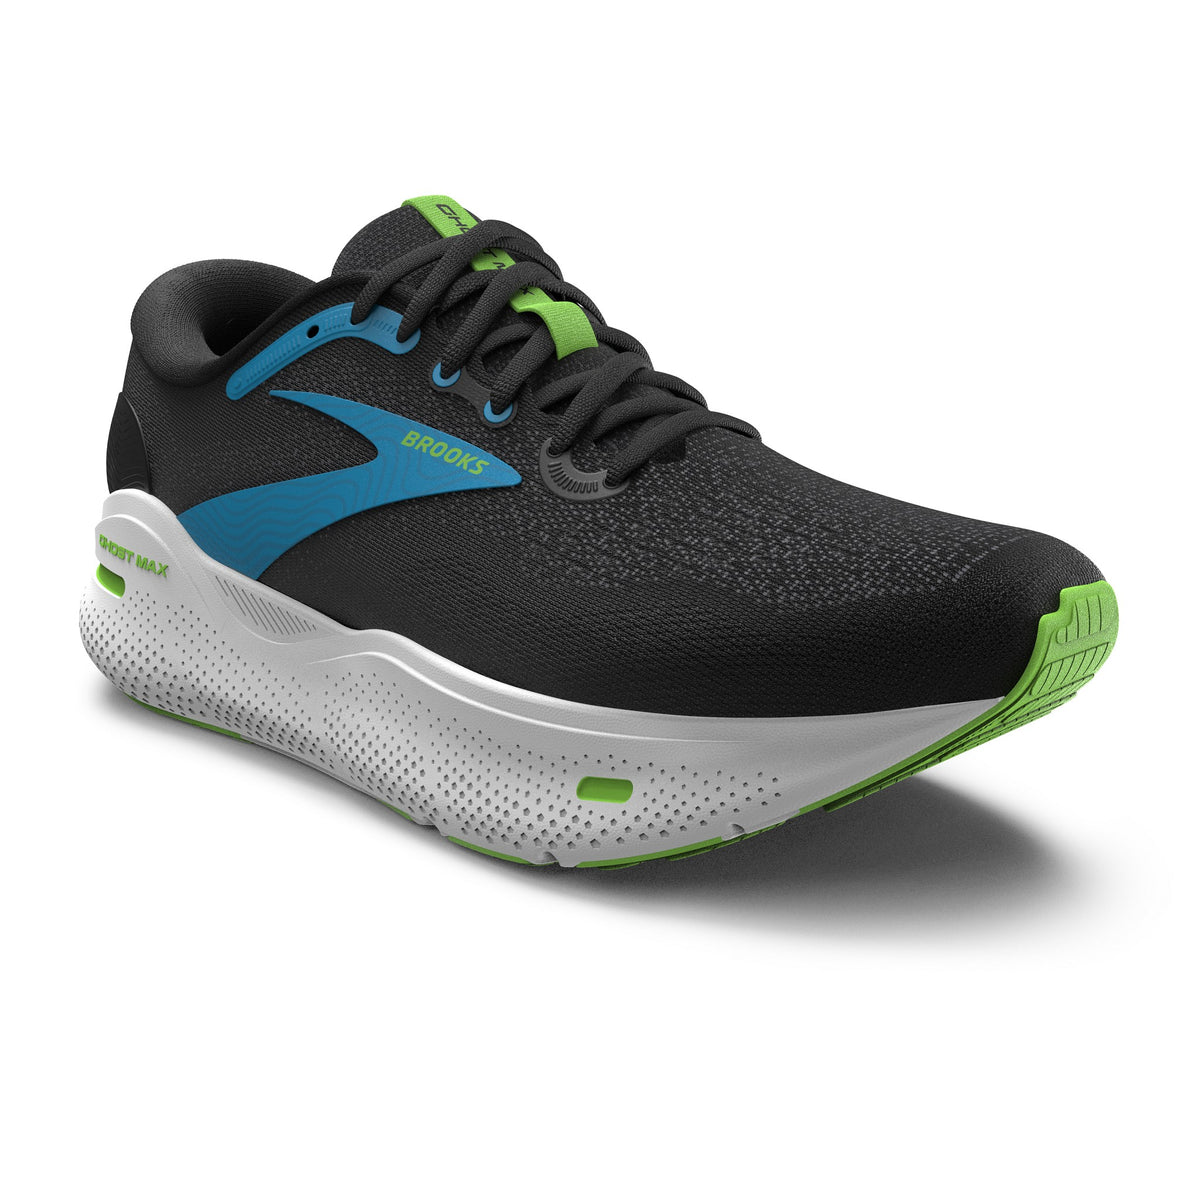 Black and blue Brooks Ghost Max running shoe with white sole and green accents on a white background.